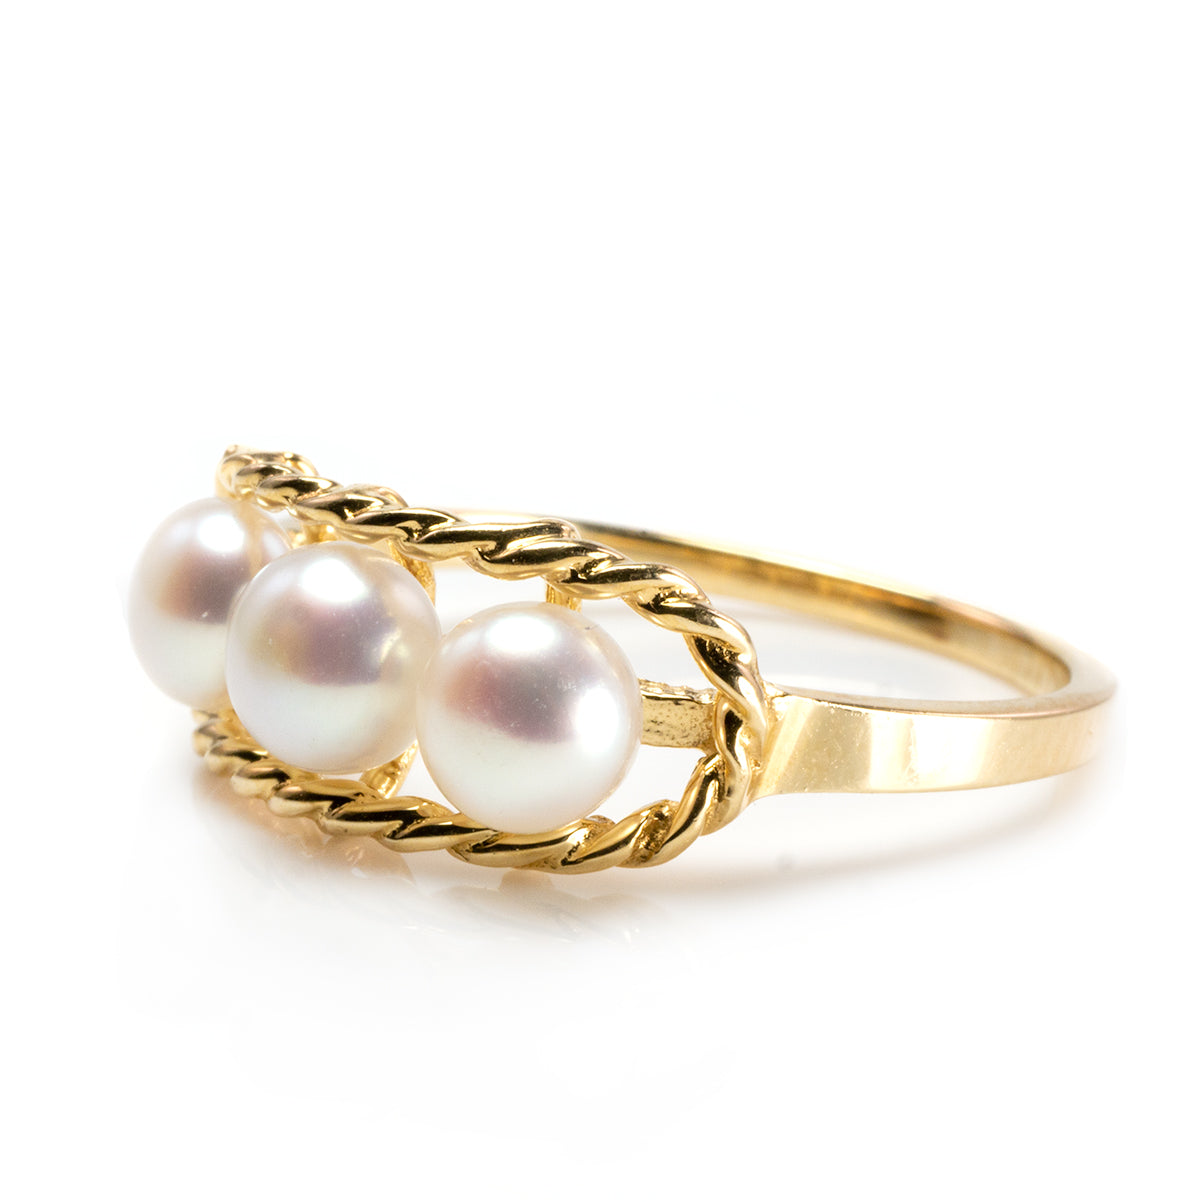 Vintage 10K Yellow Gold Pearl Ring Size 6.75 Circa 1960 - Colonial Trading  Company